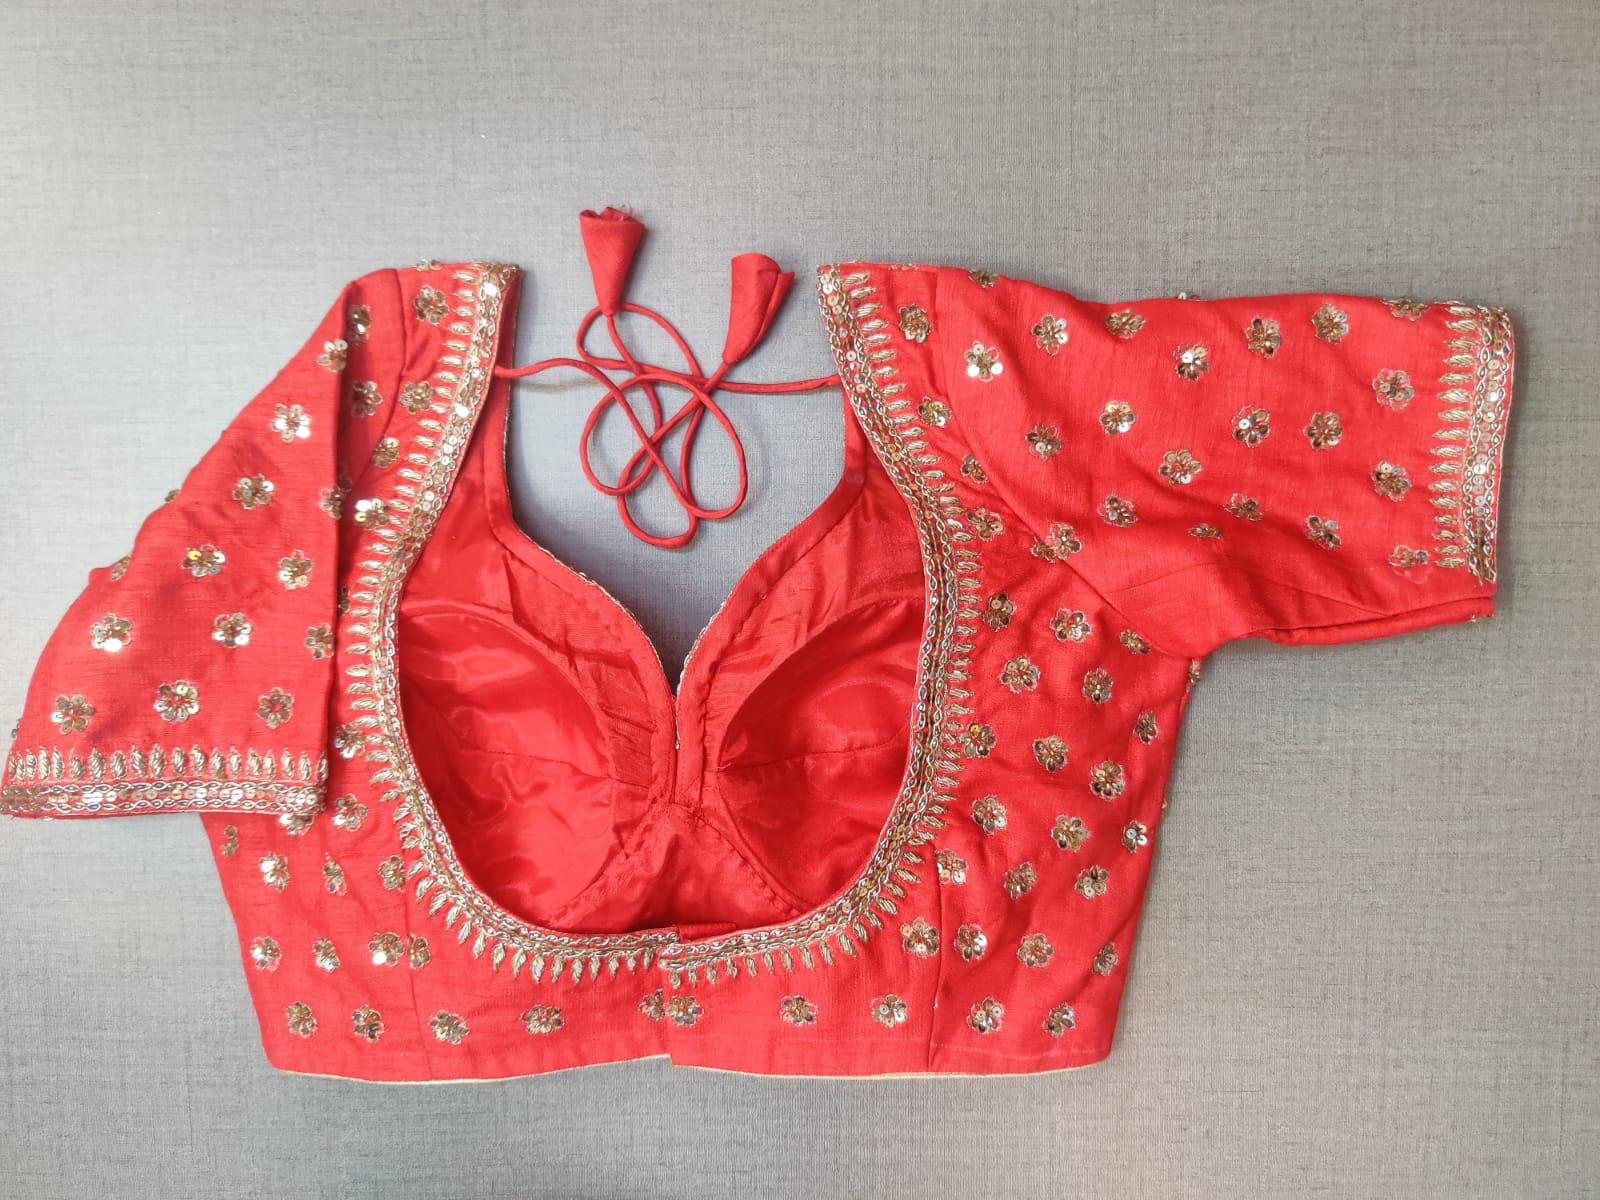 Buy beautiful tomato red embroidered designer saree blouse online in USA. Elevate your Indian ethnic saree looks with beautiful readymade sari blouse, embroidered saree blouses, Banarasi saree blouse, designer saree blouses, sleeveless saree blouses from Pure Elegance Indian fashion store in USA.-back